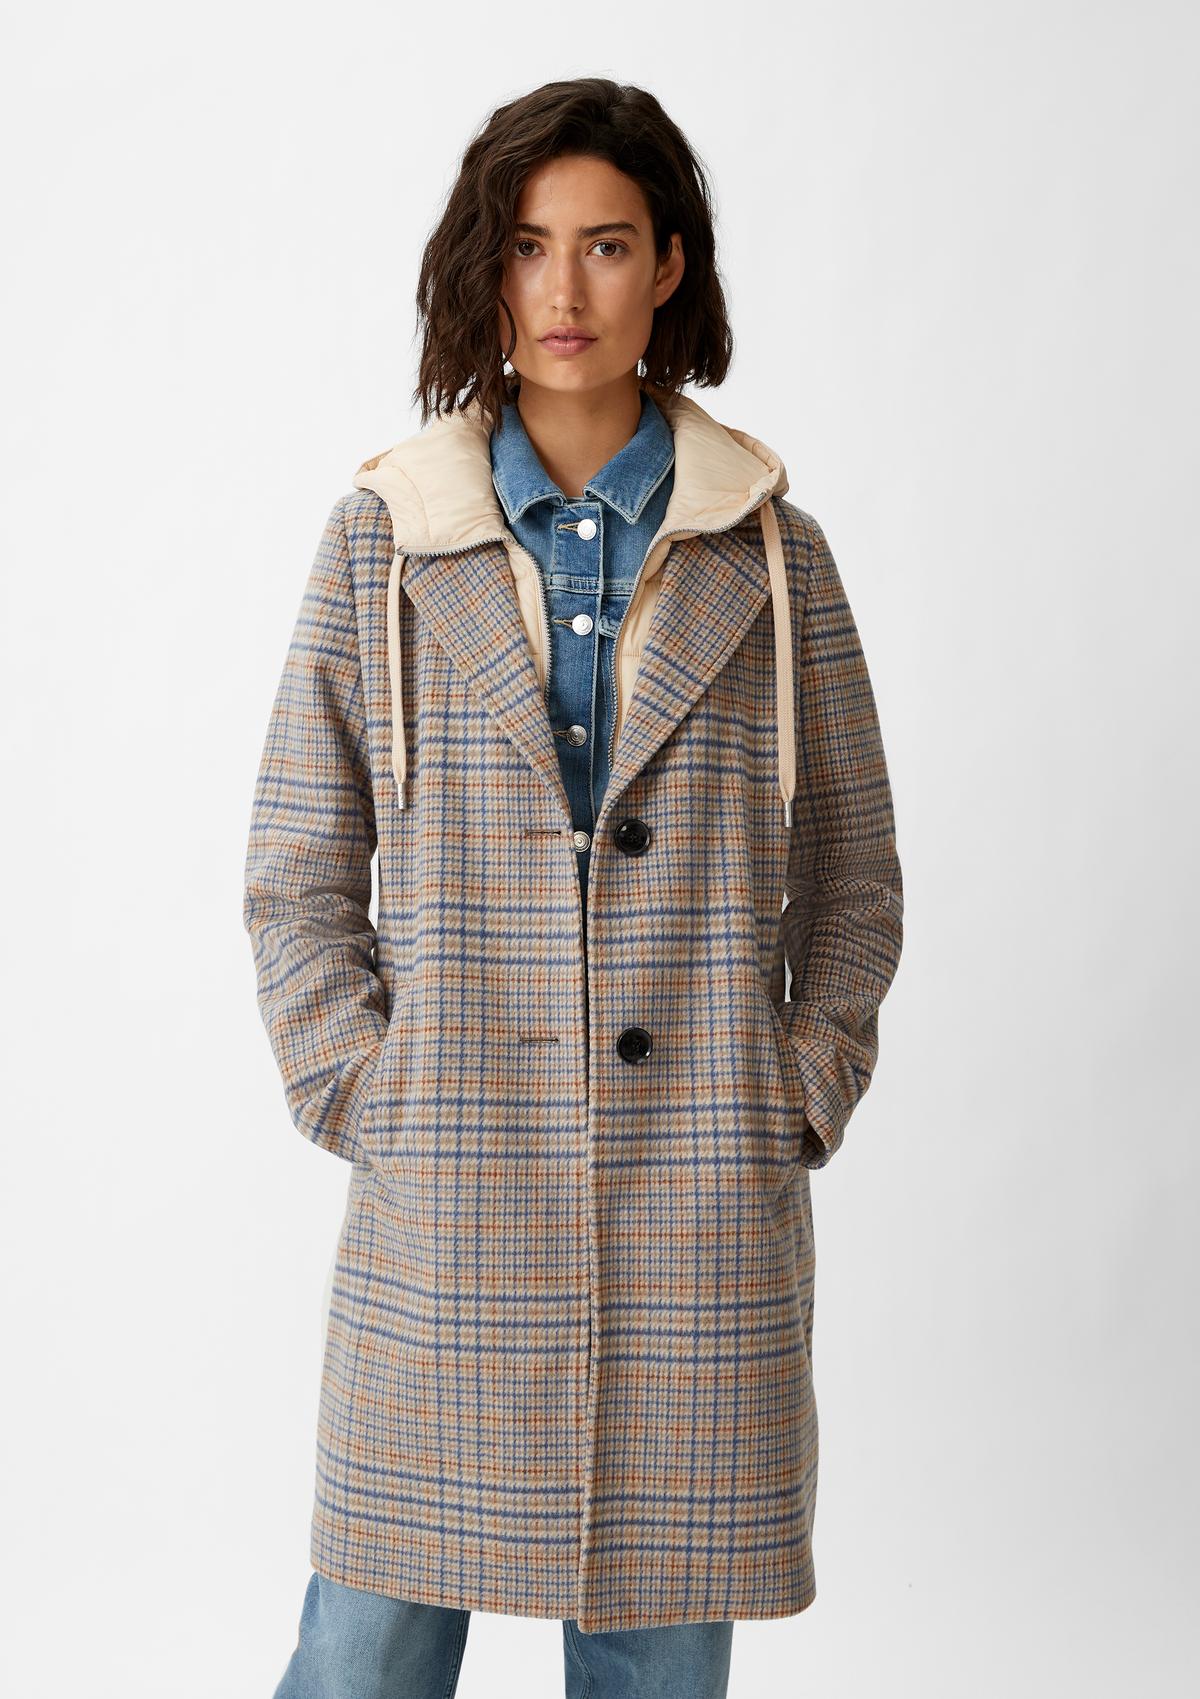 Wool blend coat with an insert